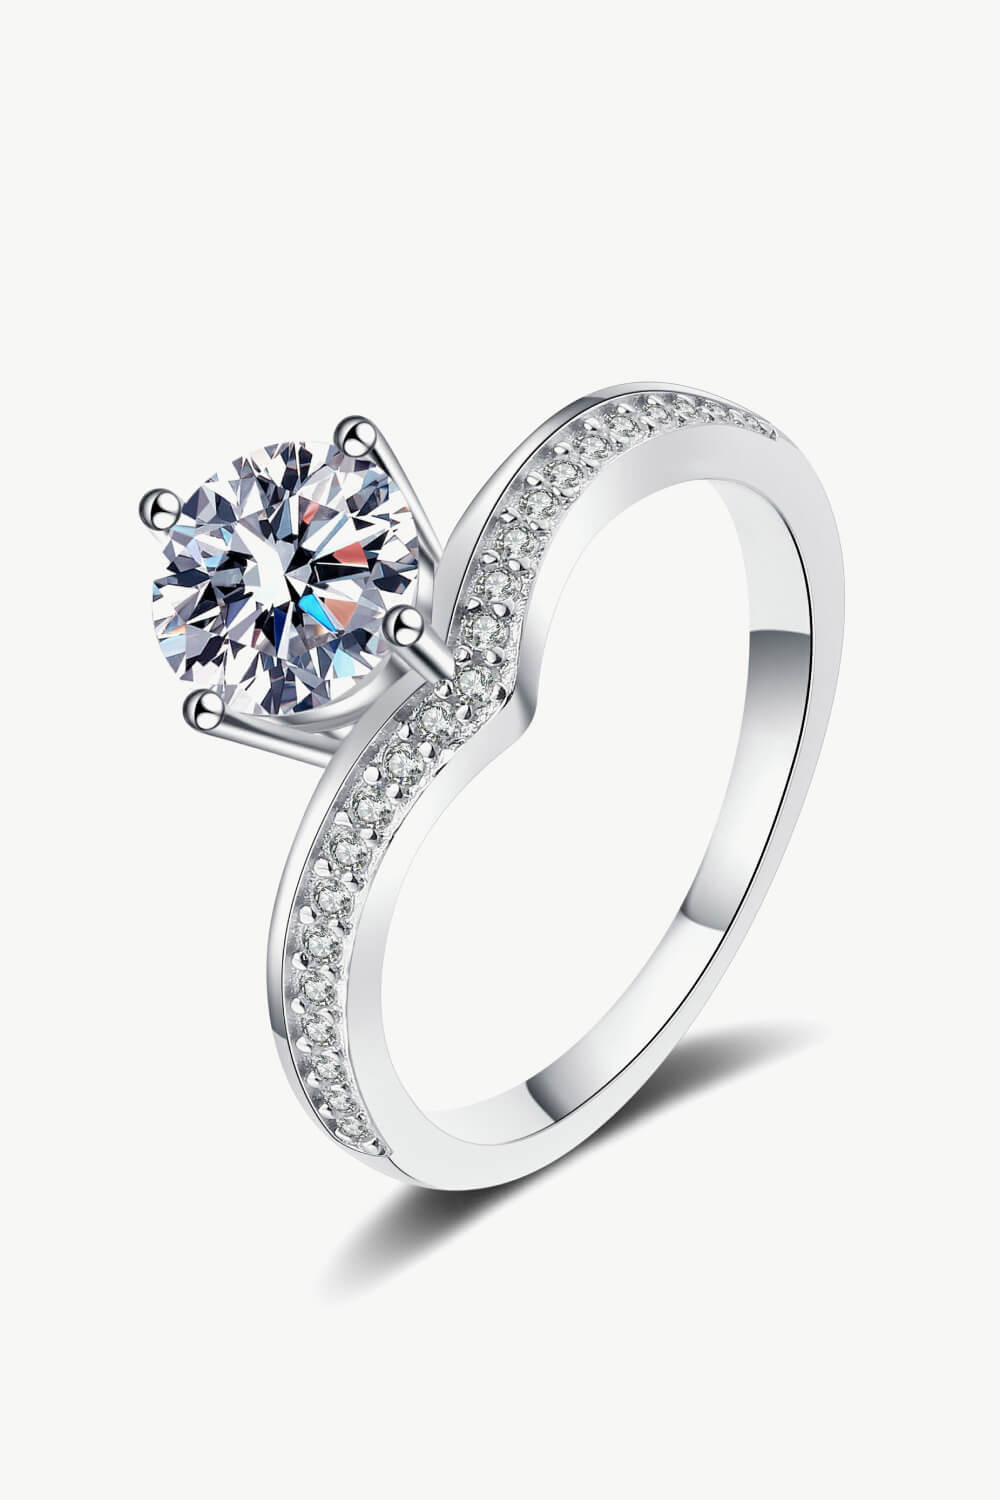 Rhodium Over Pure Sterling Silver Ring with 1 Carat Brilliant Round Cut Moissanite